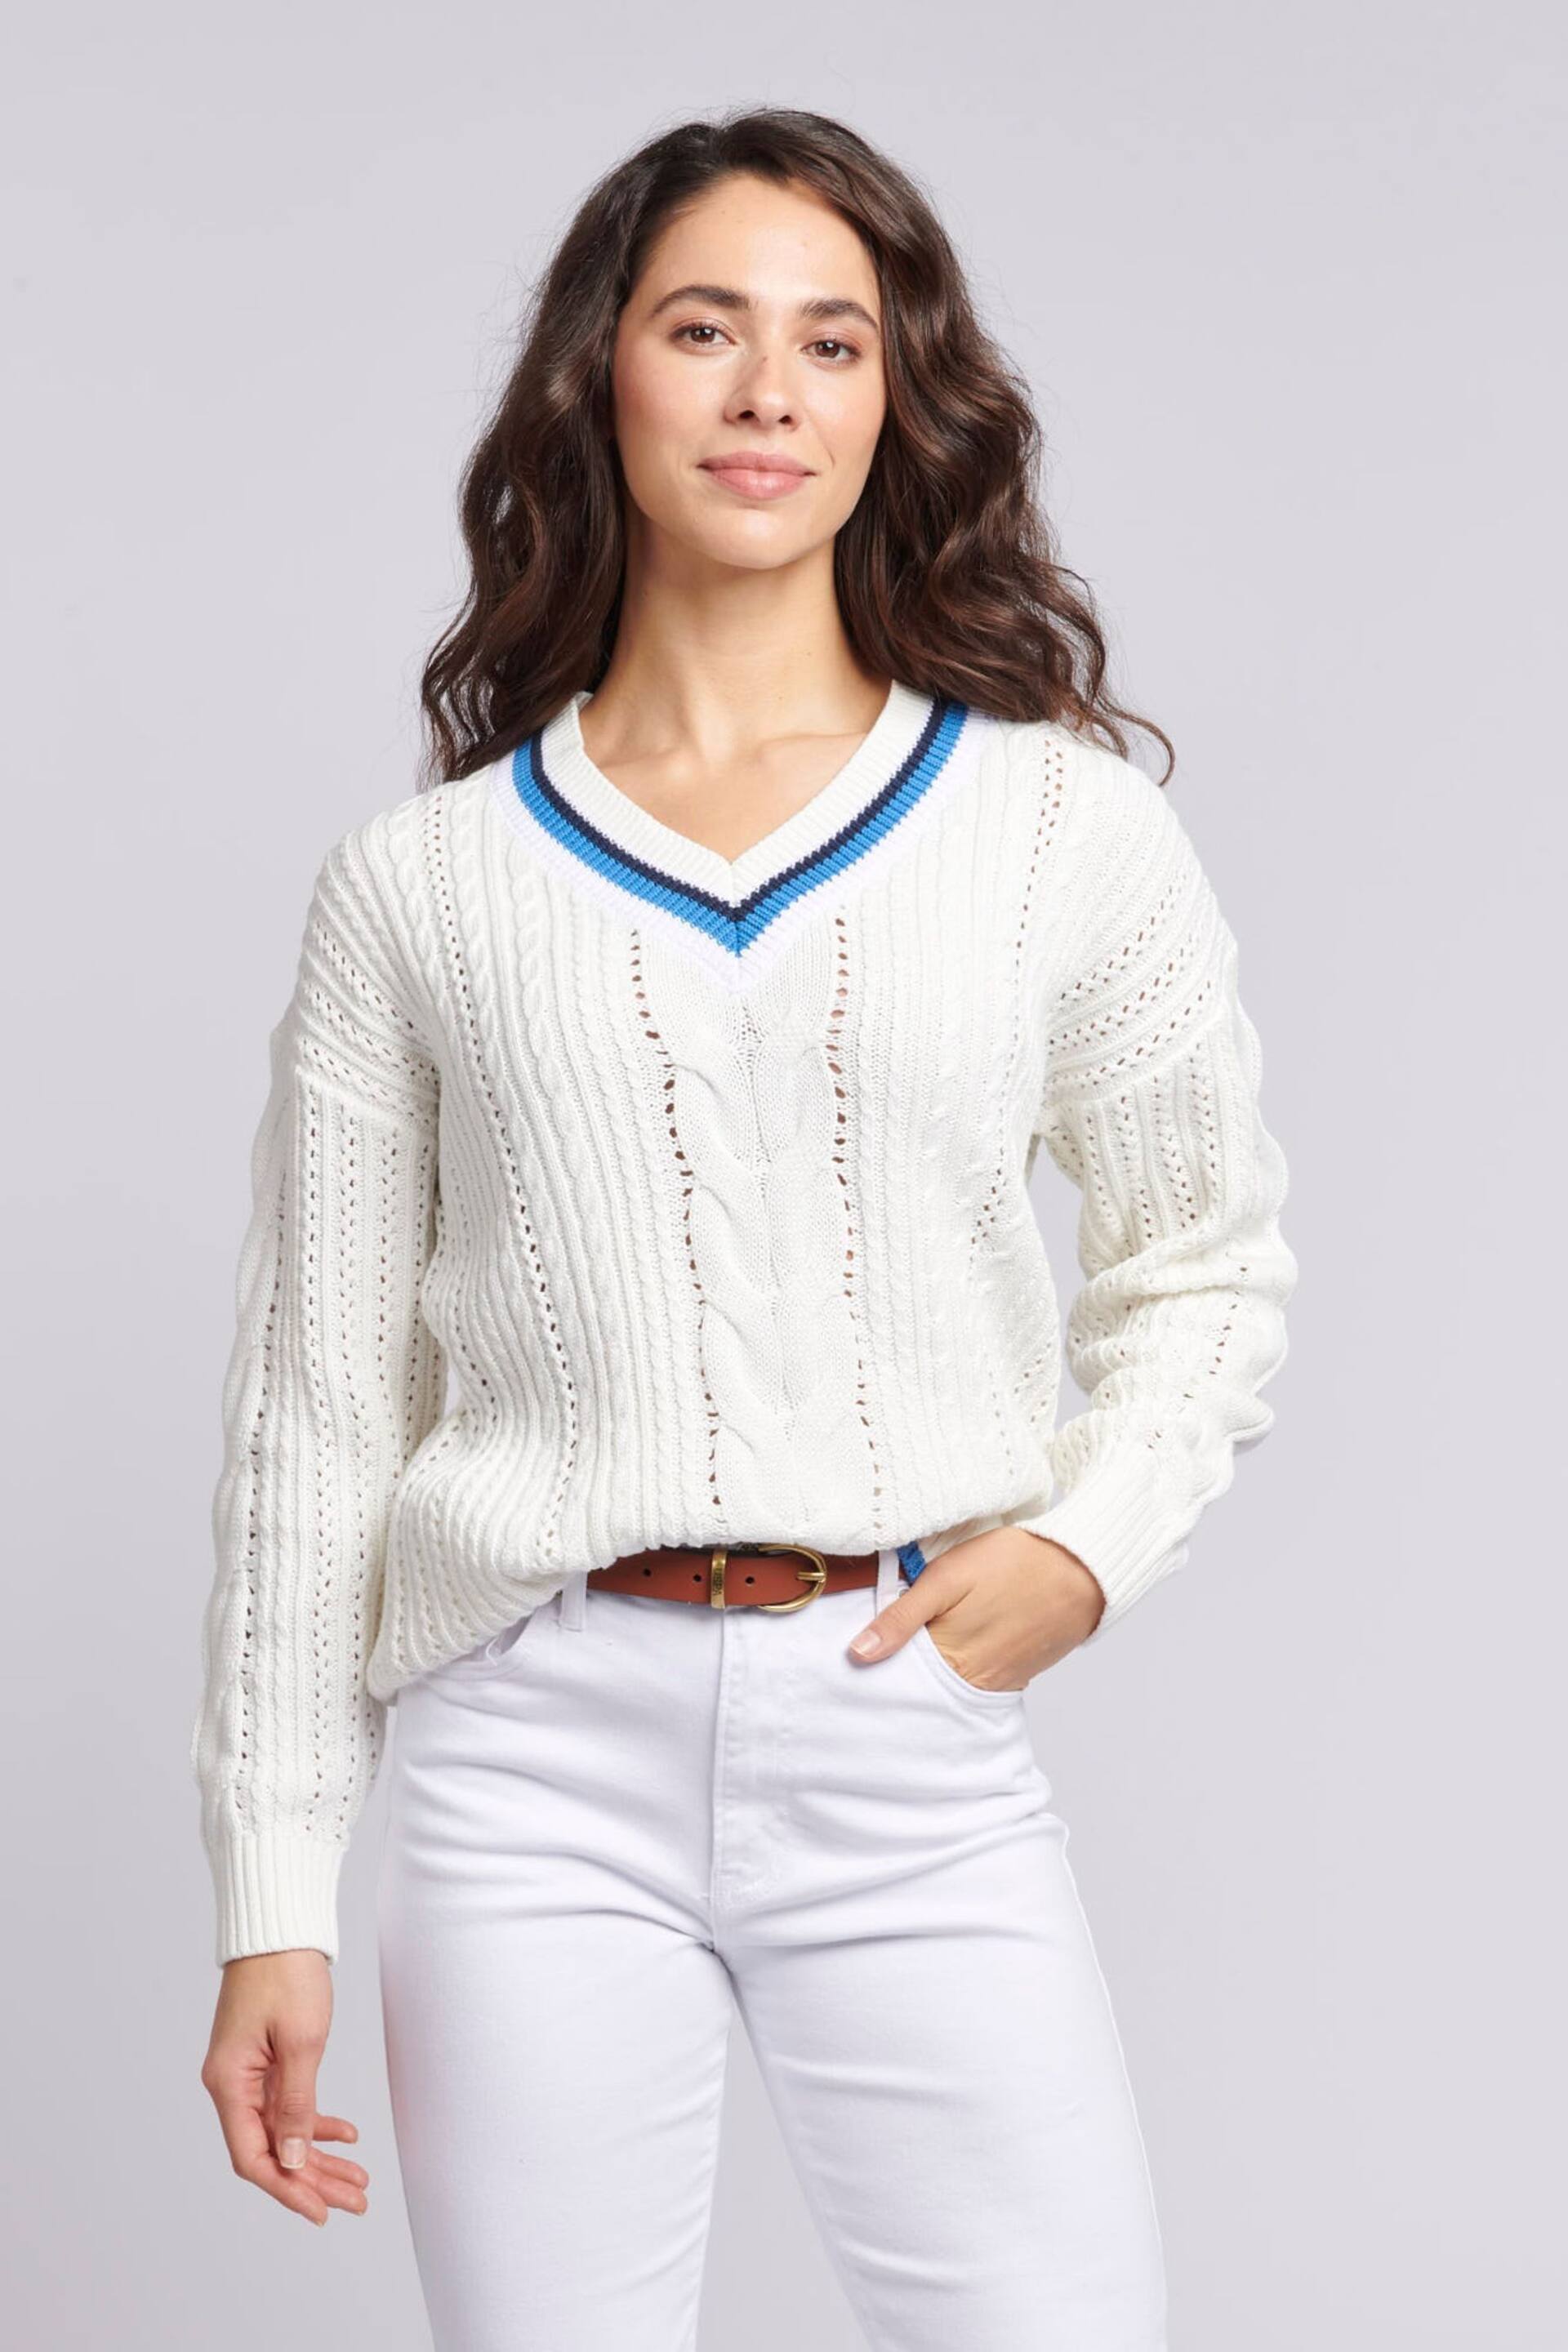 U.S. Polo Assn. Womens Cricket White Jumper - Image 1 of 8